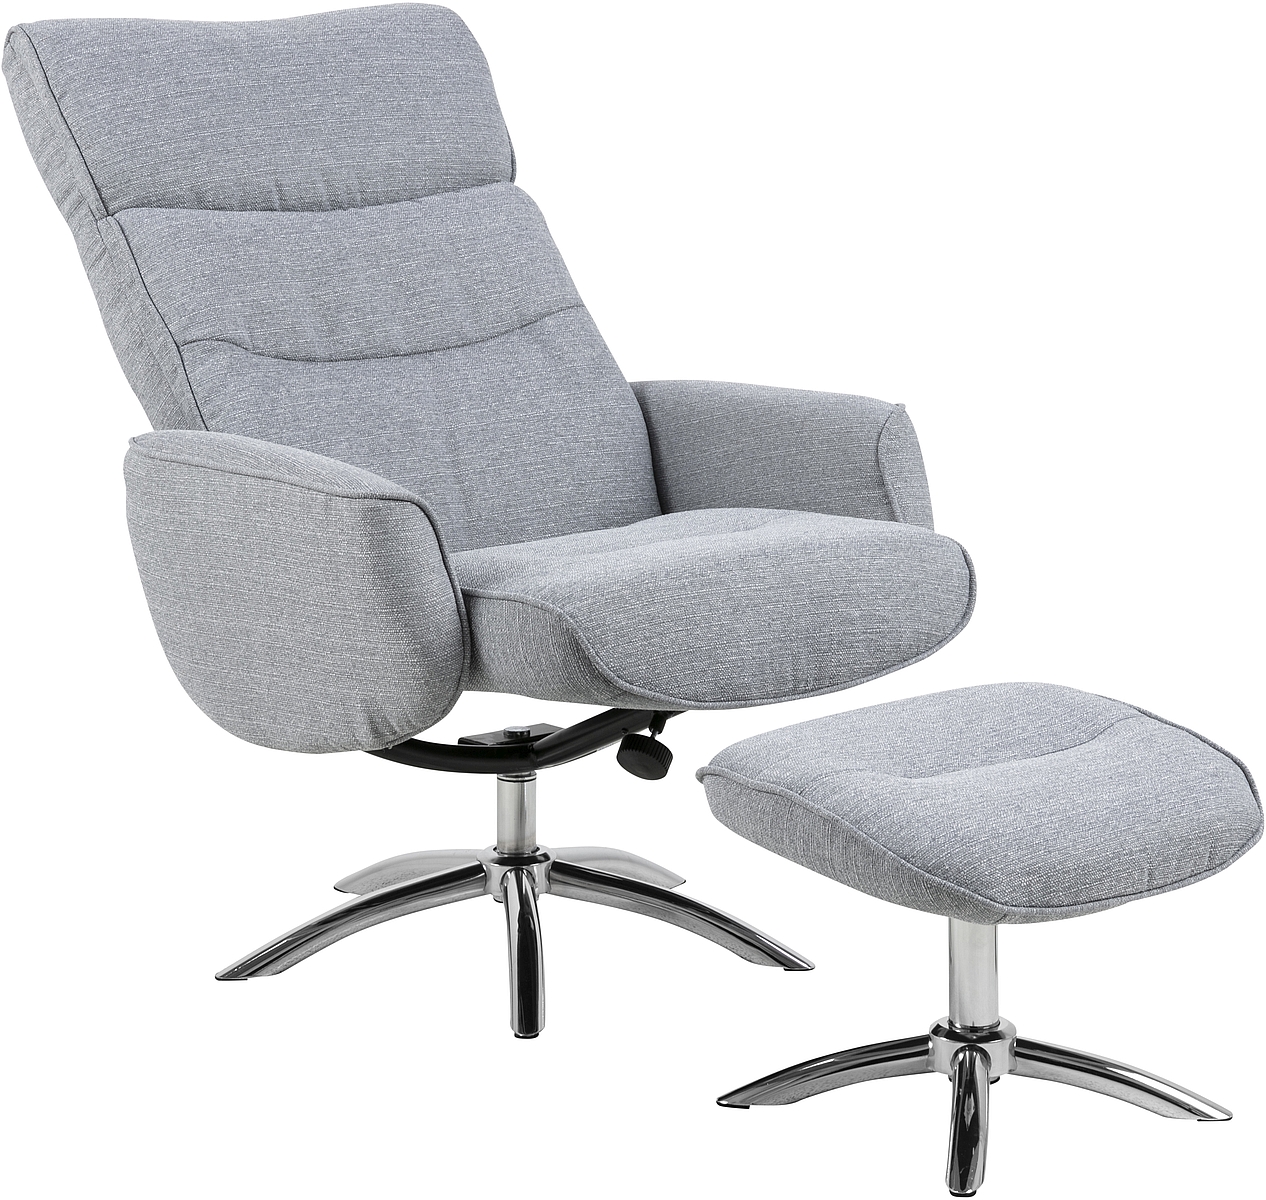 Fauteuil relax avec repose-pied WESTFIELD